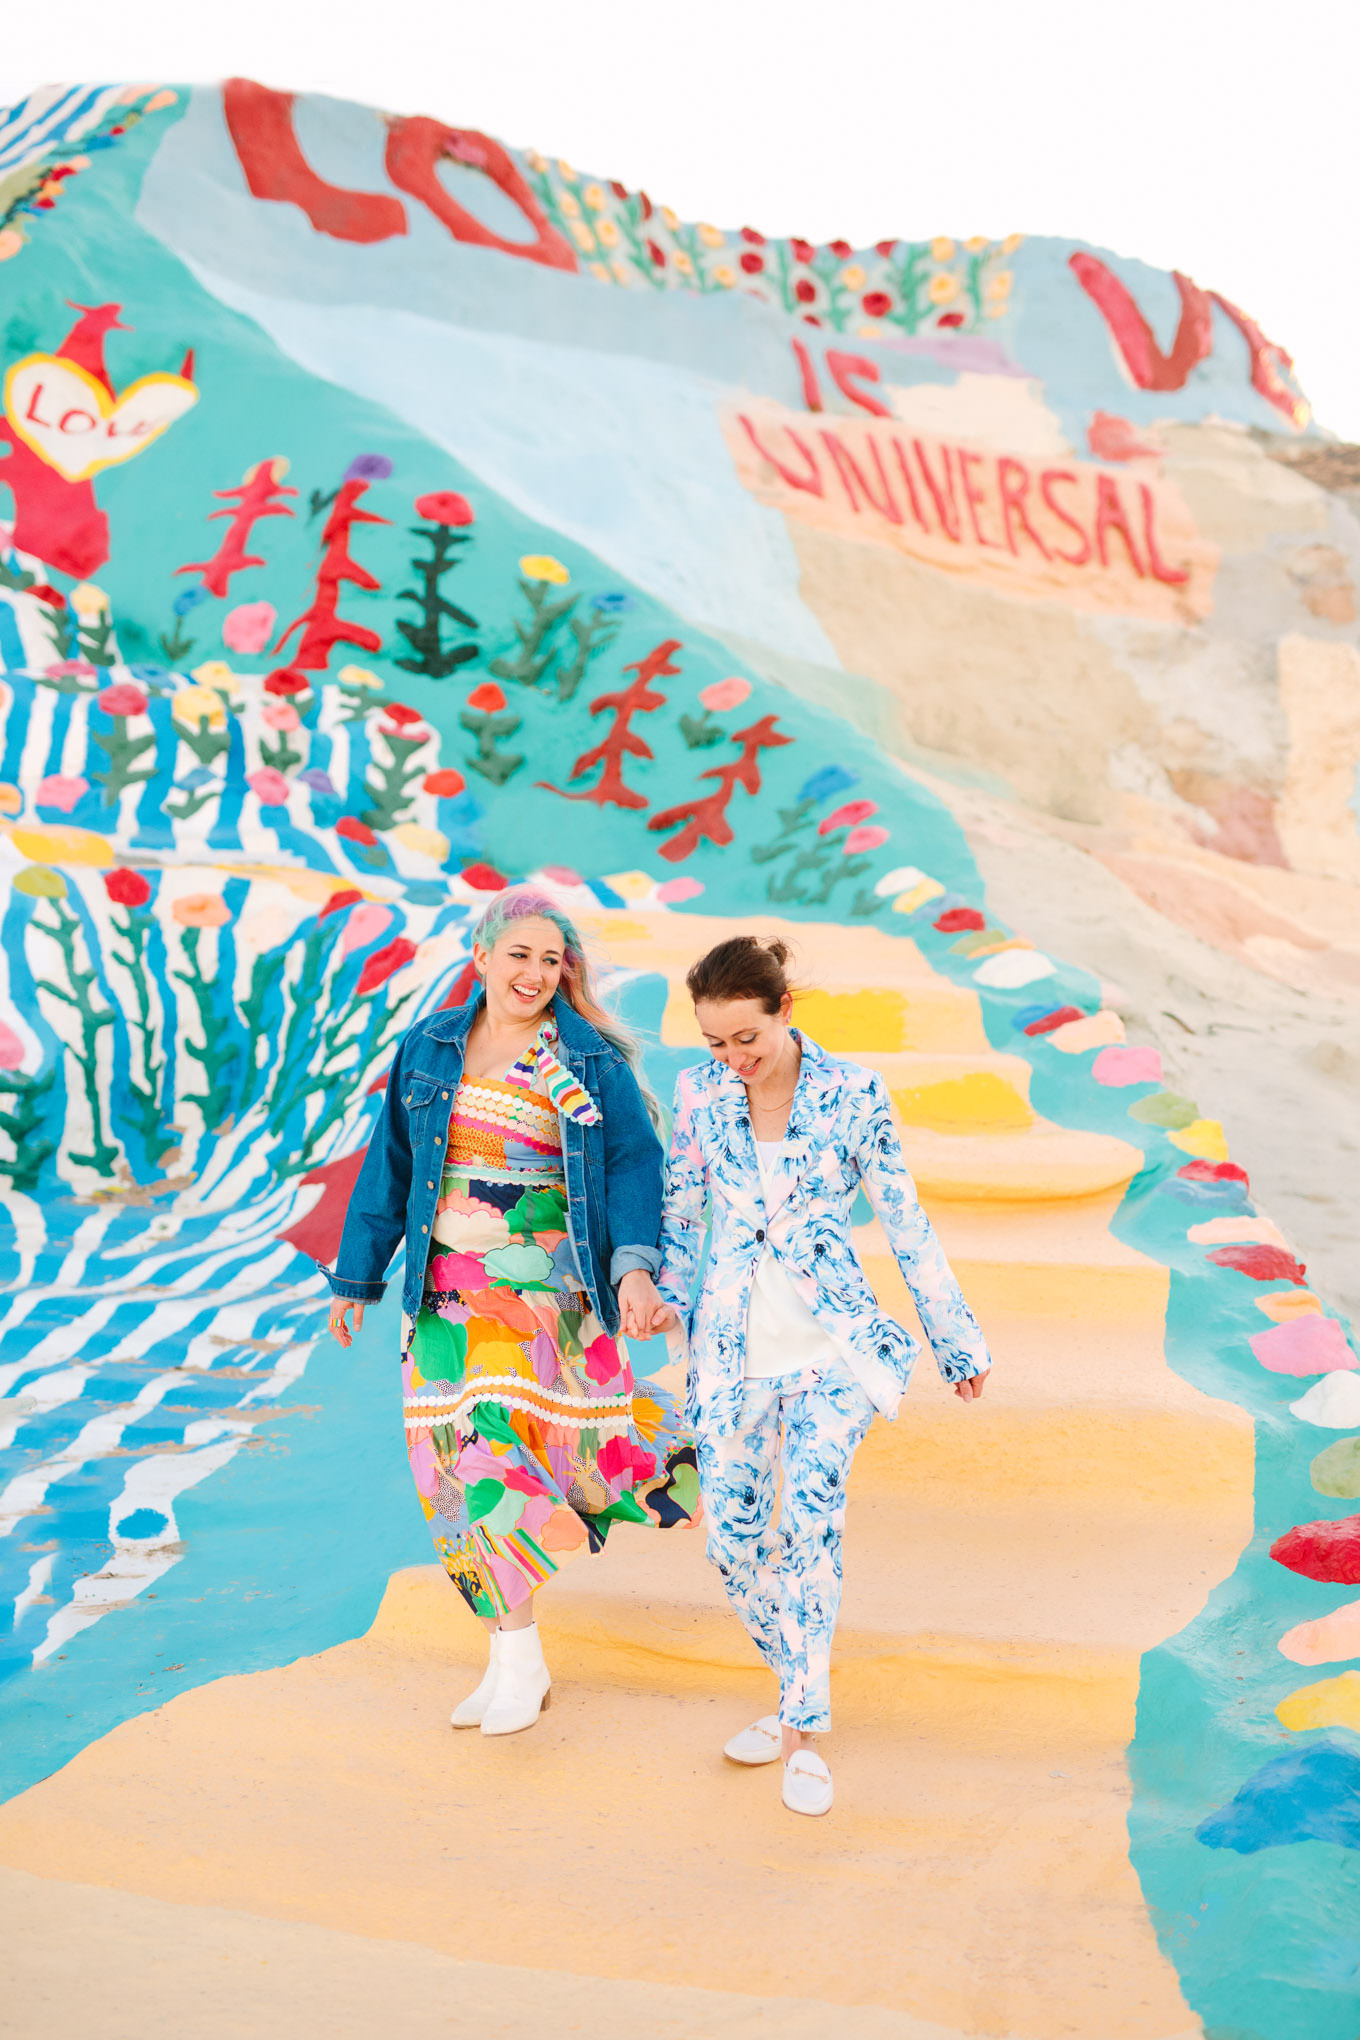 Salvation Mountain engagement session | Engagement, elopement, and wedding photography roundup of Mary Costa’s favorite images from 2020 | Colorful and elevated photography for fun-loving couples in Southern California | #2020wedding #elopement #weddingphoto #weddingphotography   Source: Mary Costa Photography | Los Angeles